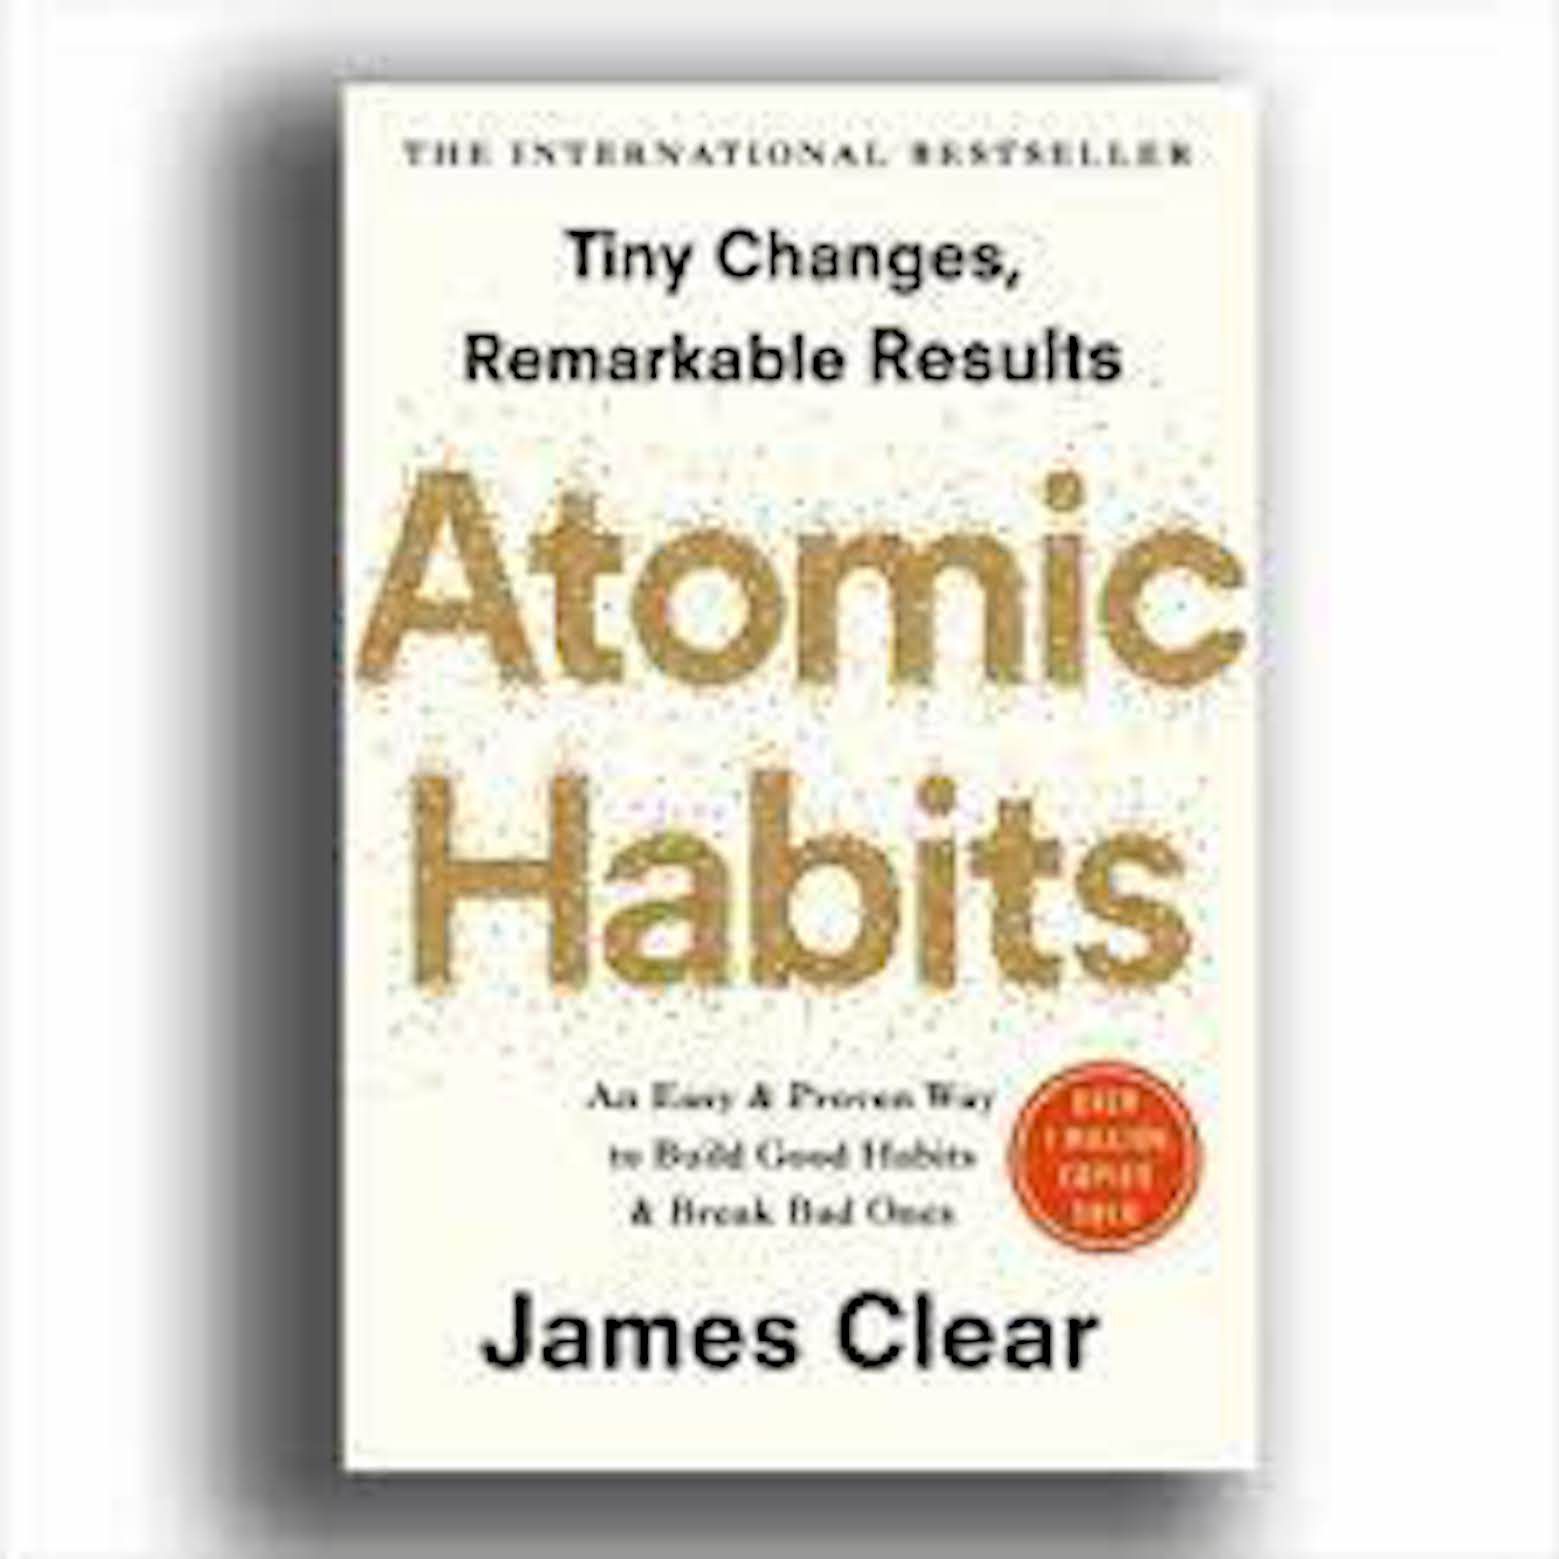     			Atomic Habits: the life-changing